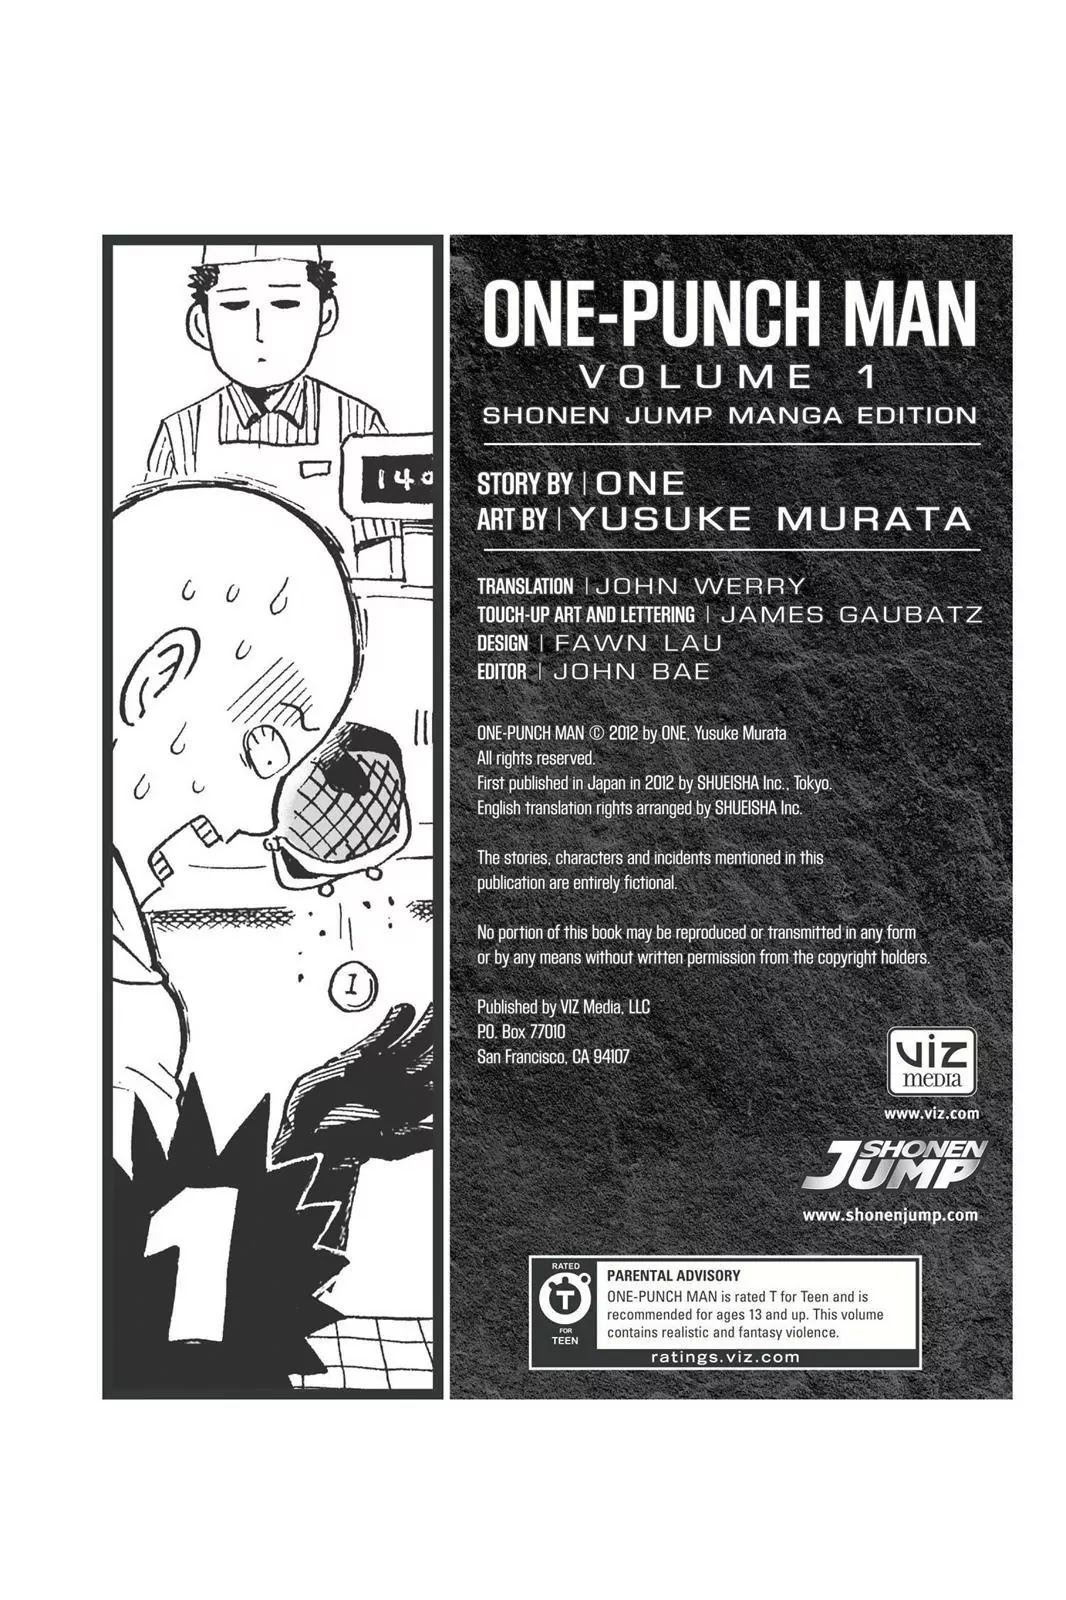 One Punch Man, Chapter 8.5  Extra Chapter 200 Yen image 26